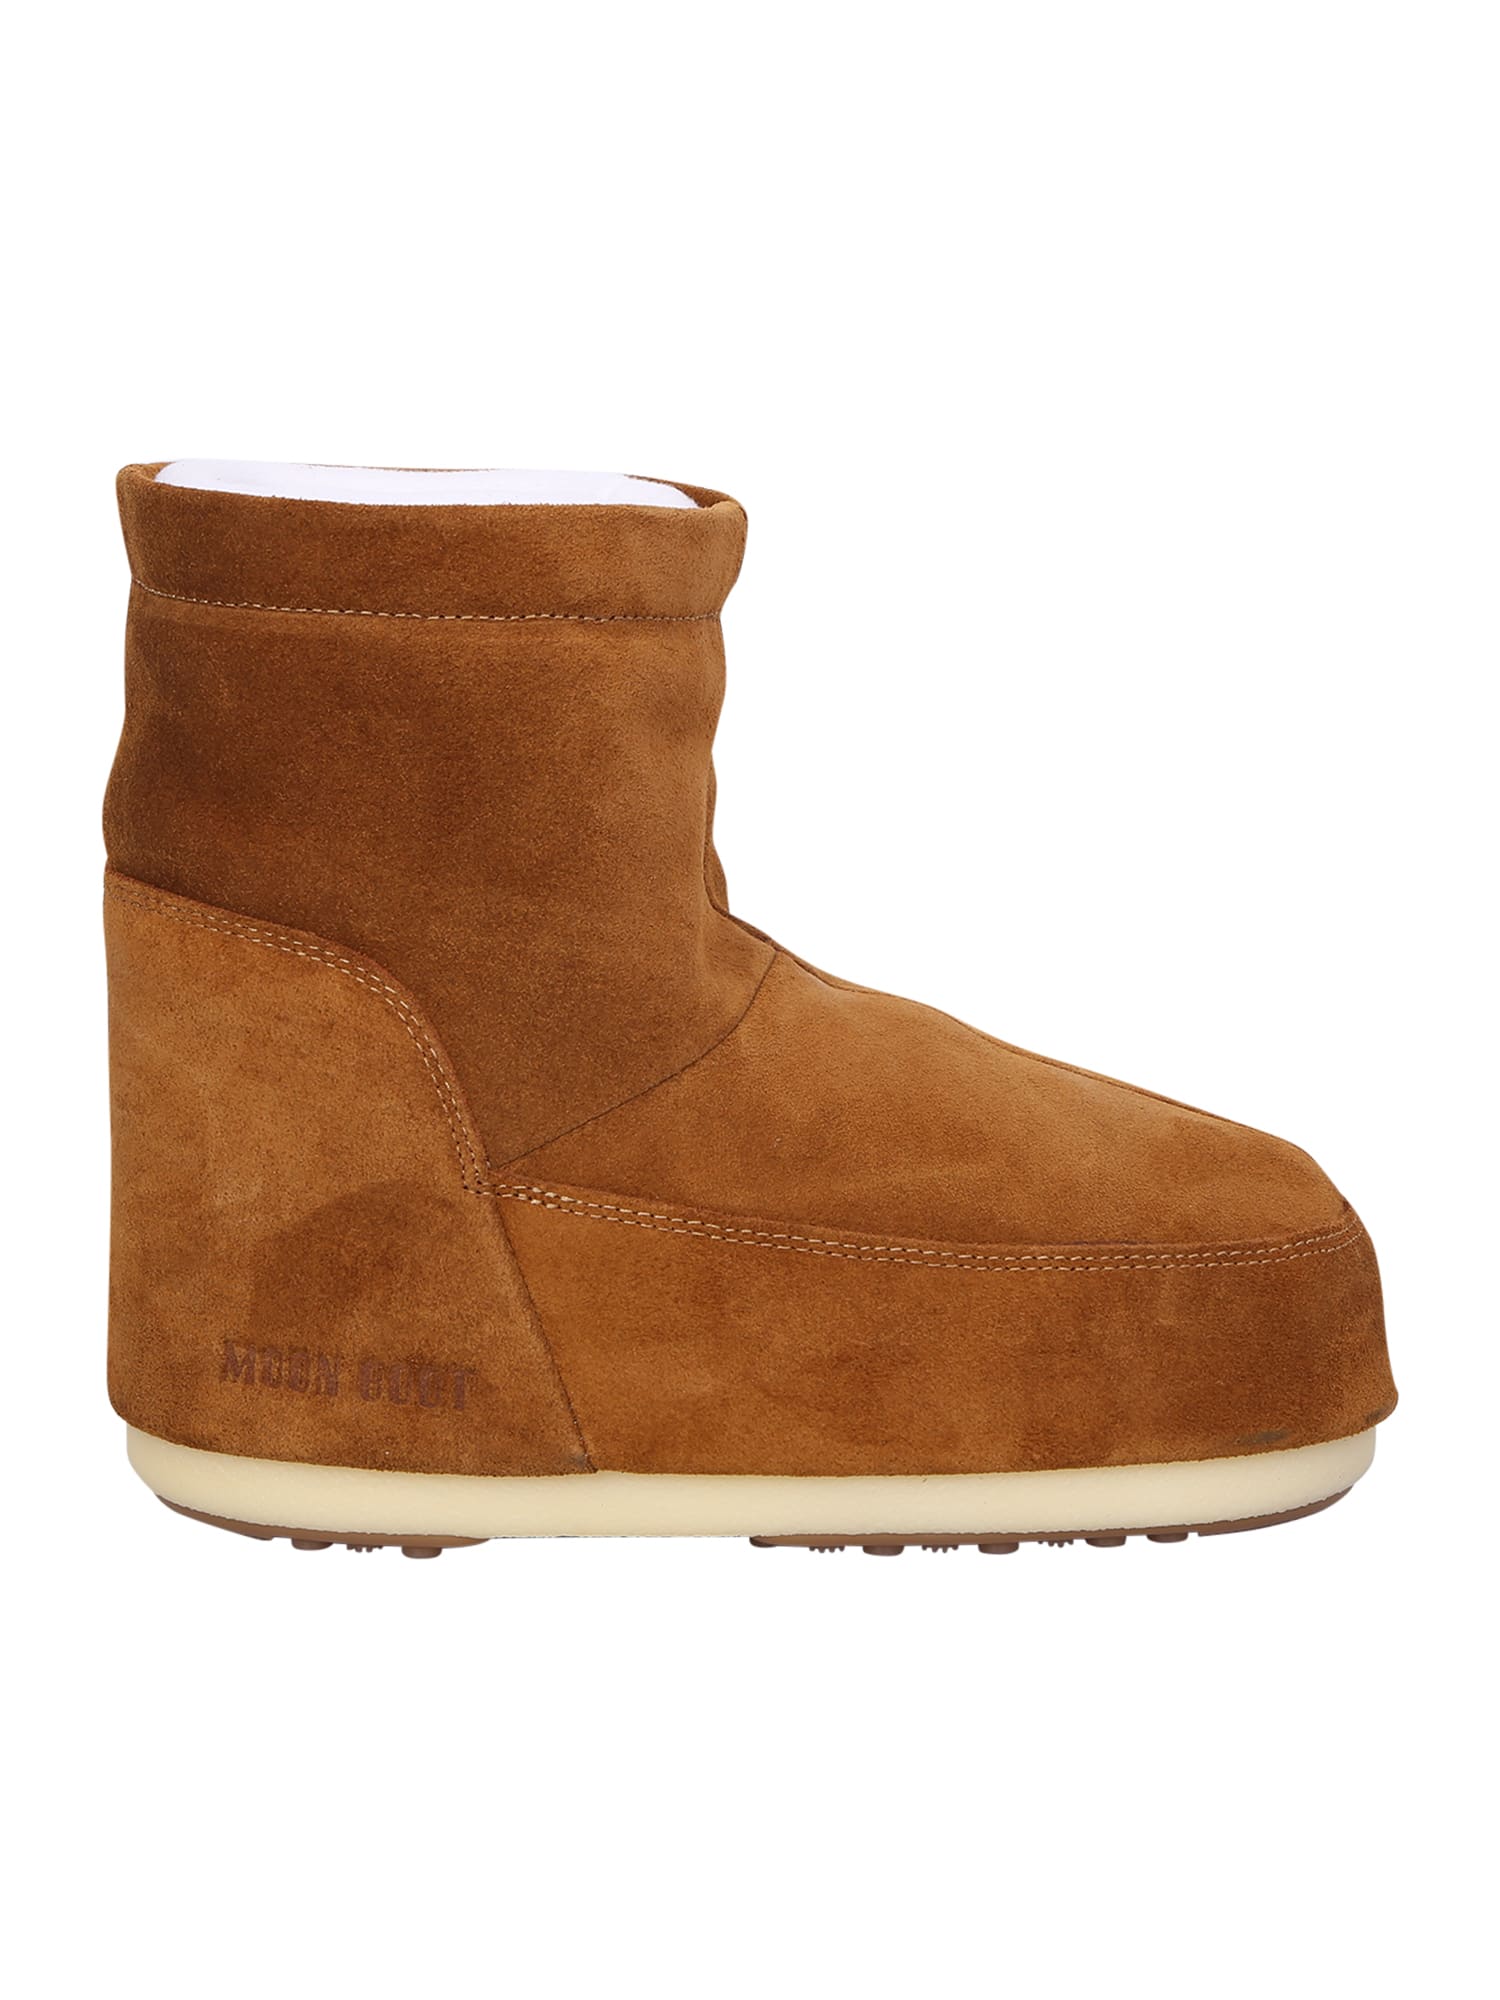 MOON BOOT BROWN SUEDE ICON LOW ANKLE BOOTS